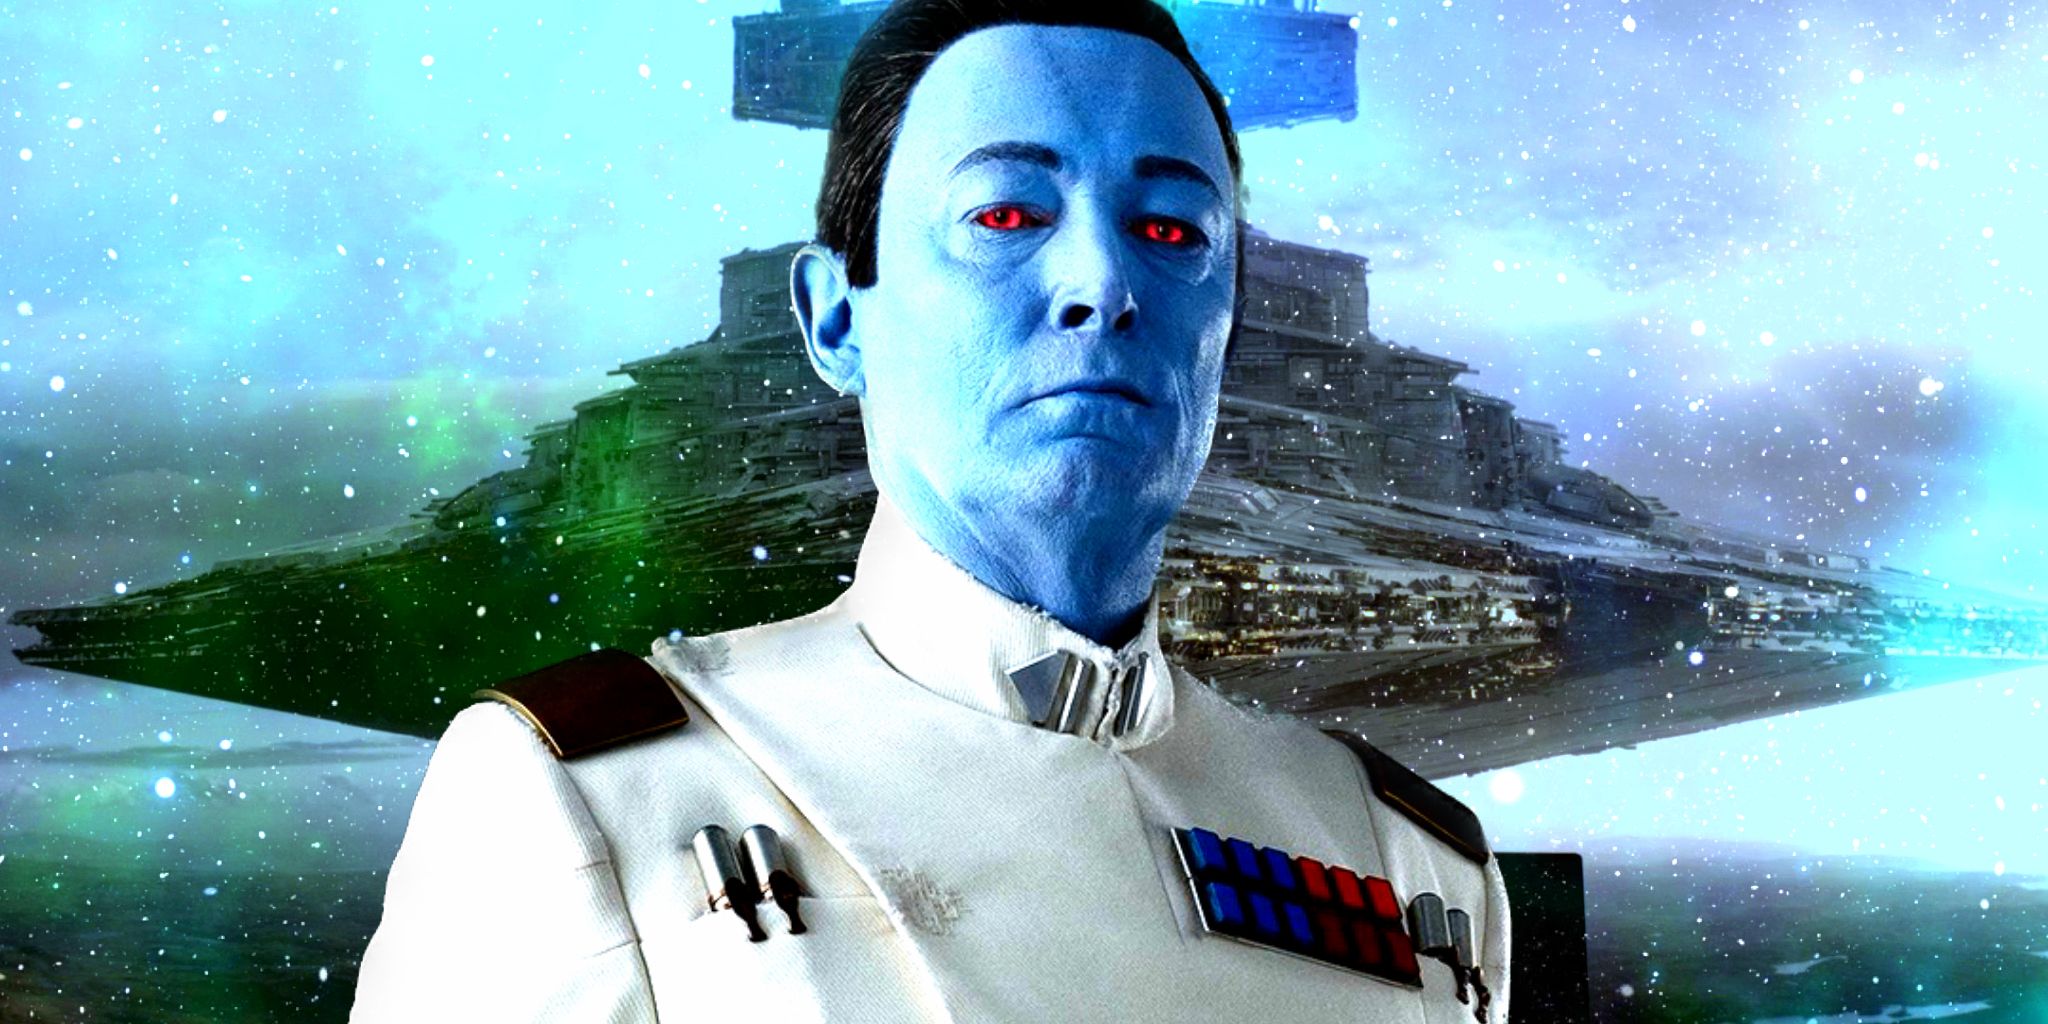 Grand Admiral Thrawn with his Chimaera Star Destroyer in the background.